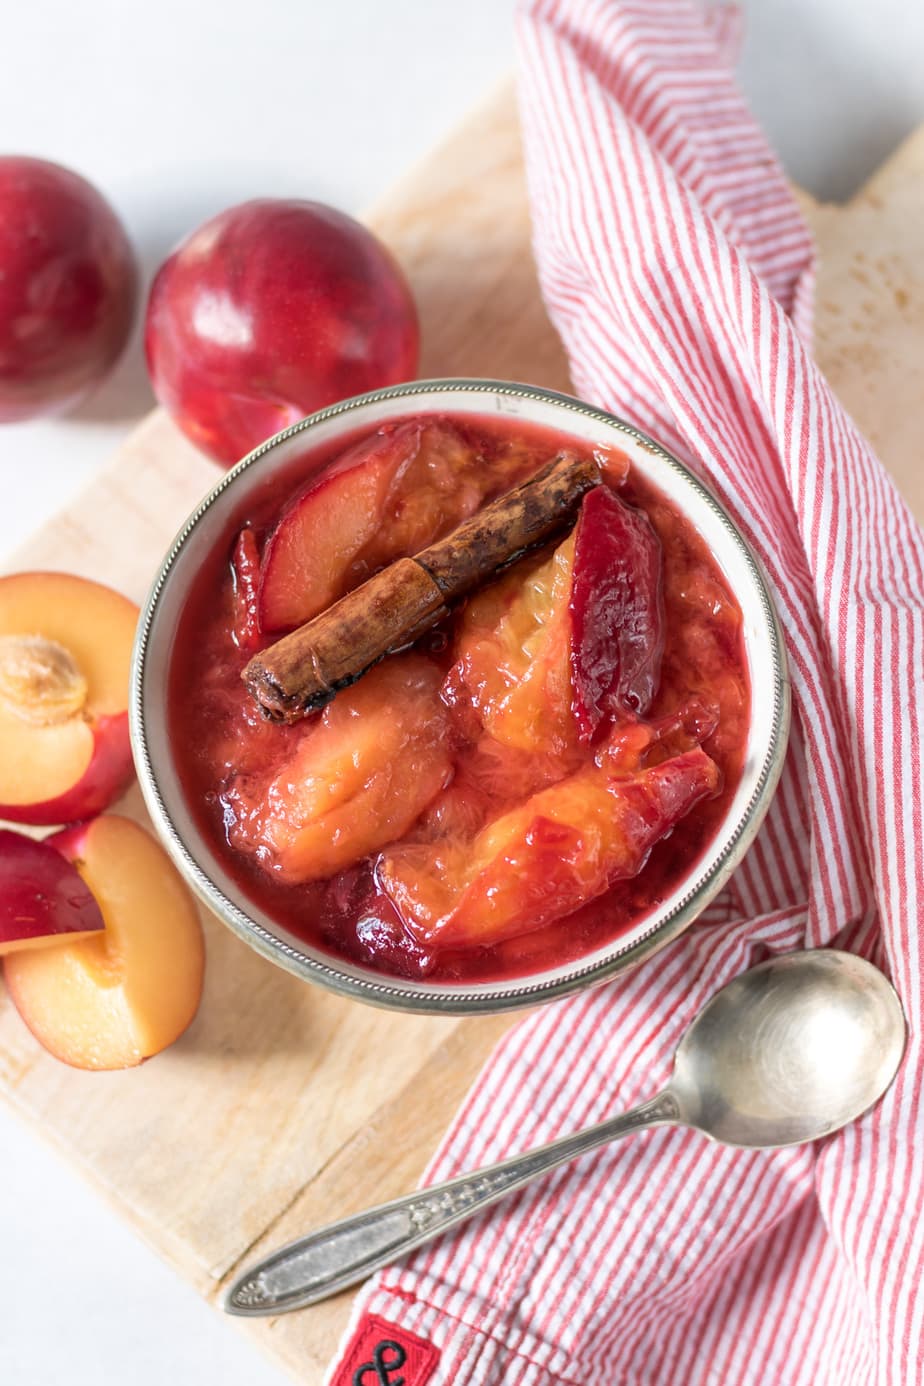 Bowl of cooked plums with cinnamon stick.